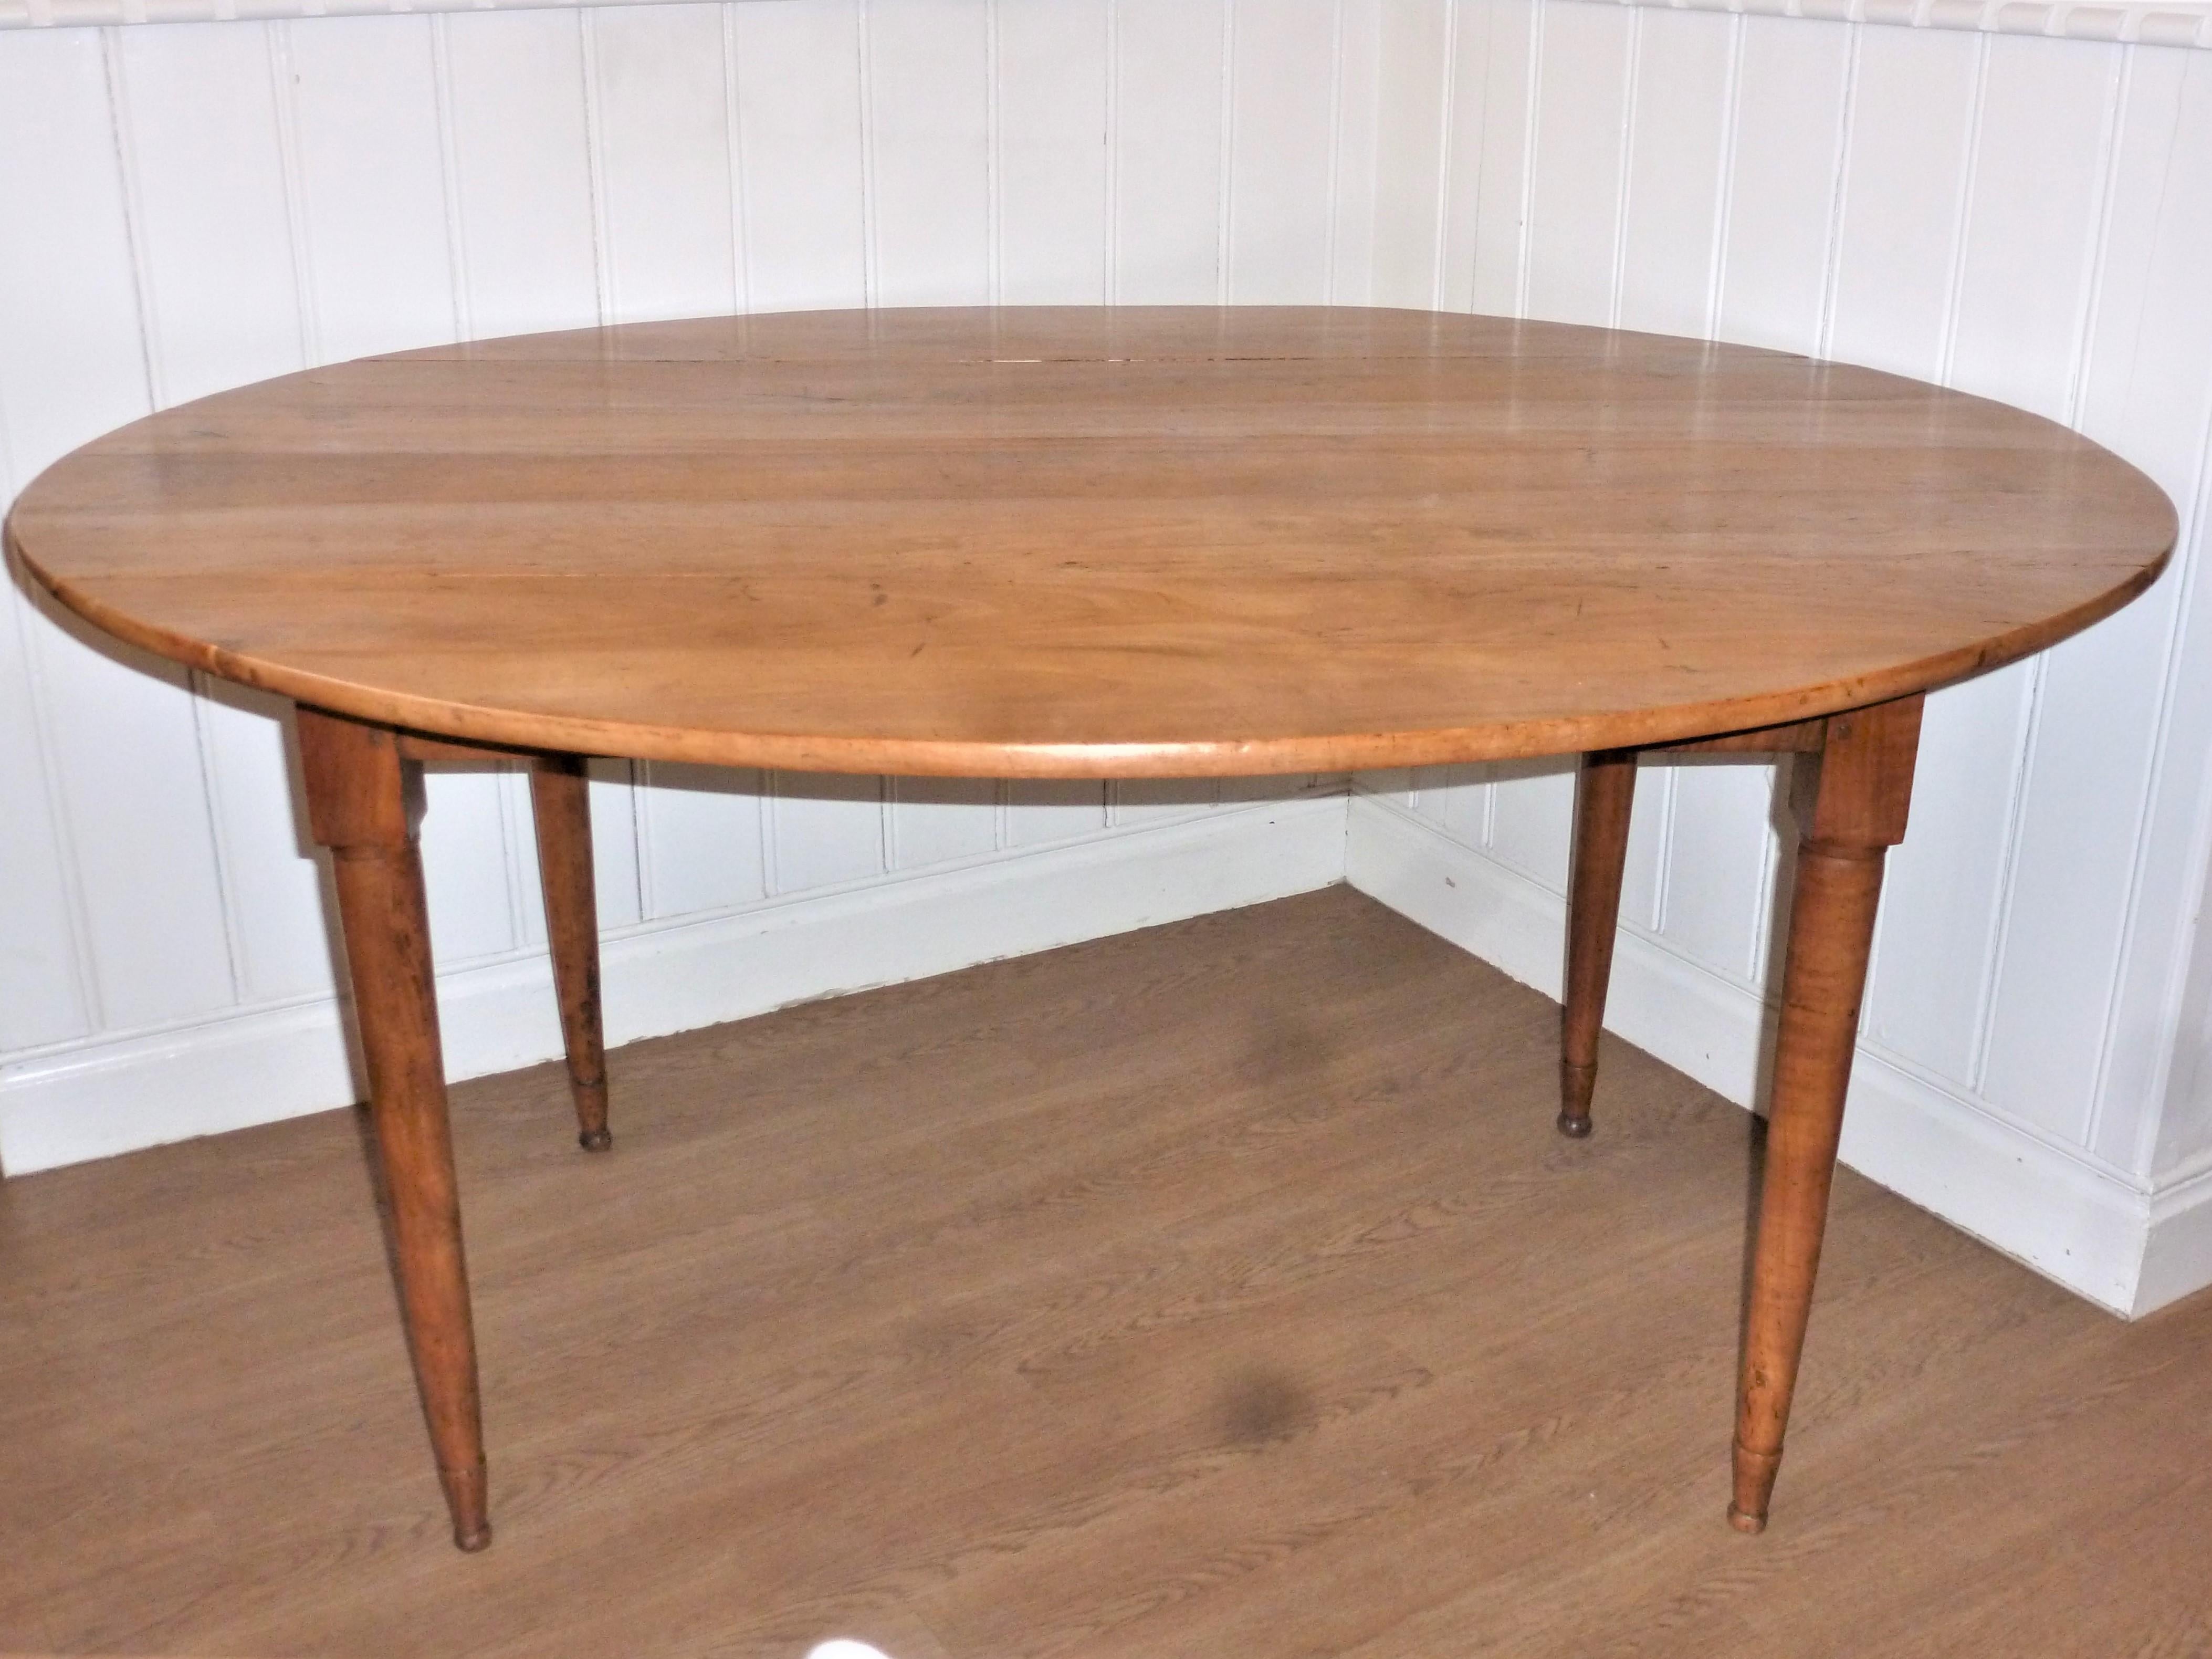 Late 18th-early 19th century French large oval cherry dining table with drop leaf on original Louis XVI legs.
Made with the traditional small pegs.
Lovely color, woodgrain and patination. Looks like blond walnut.
Early example, simple yet very